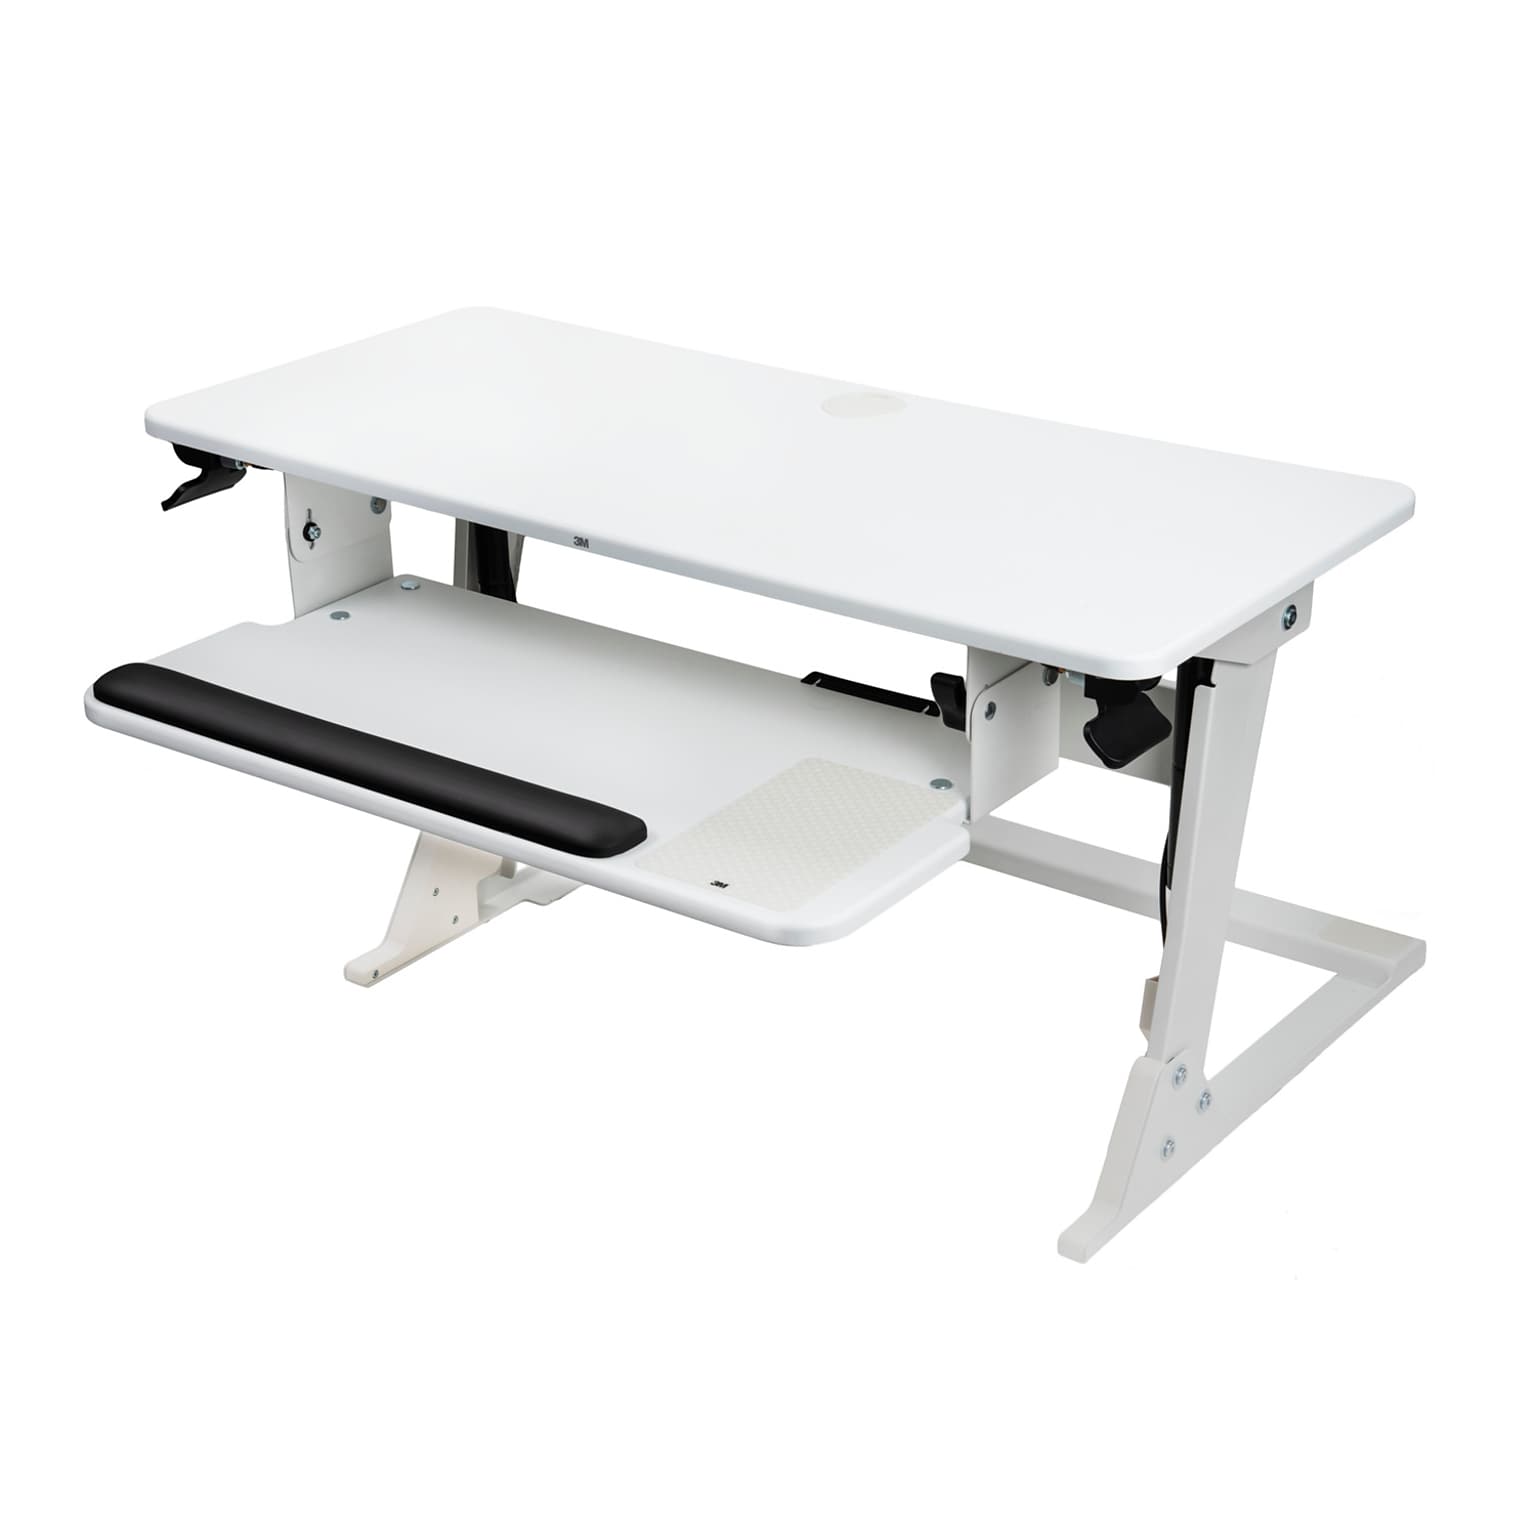 3M™ Precision Standing Desk 35W Manual Adjustable Desk Riser with Gel Wrist Rest and Precise™ Mouse Pad, White (SD60W)